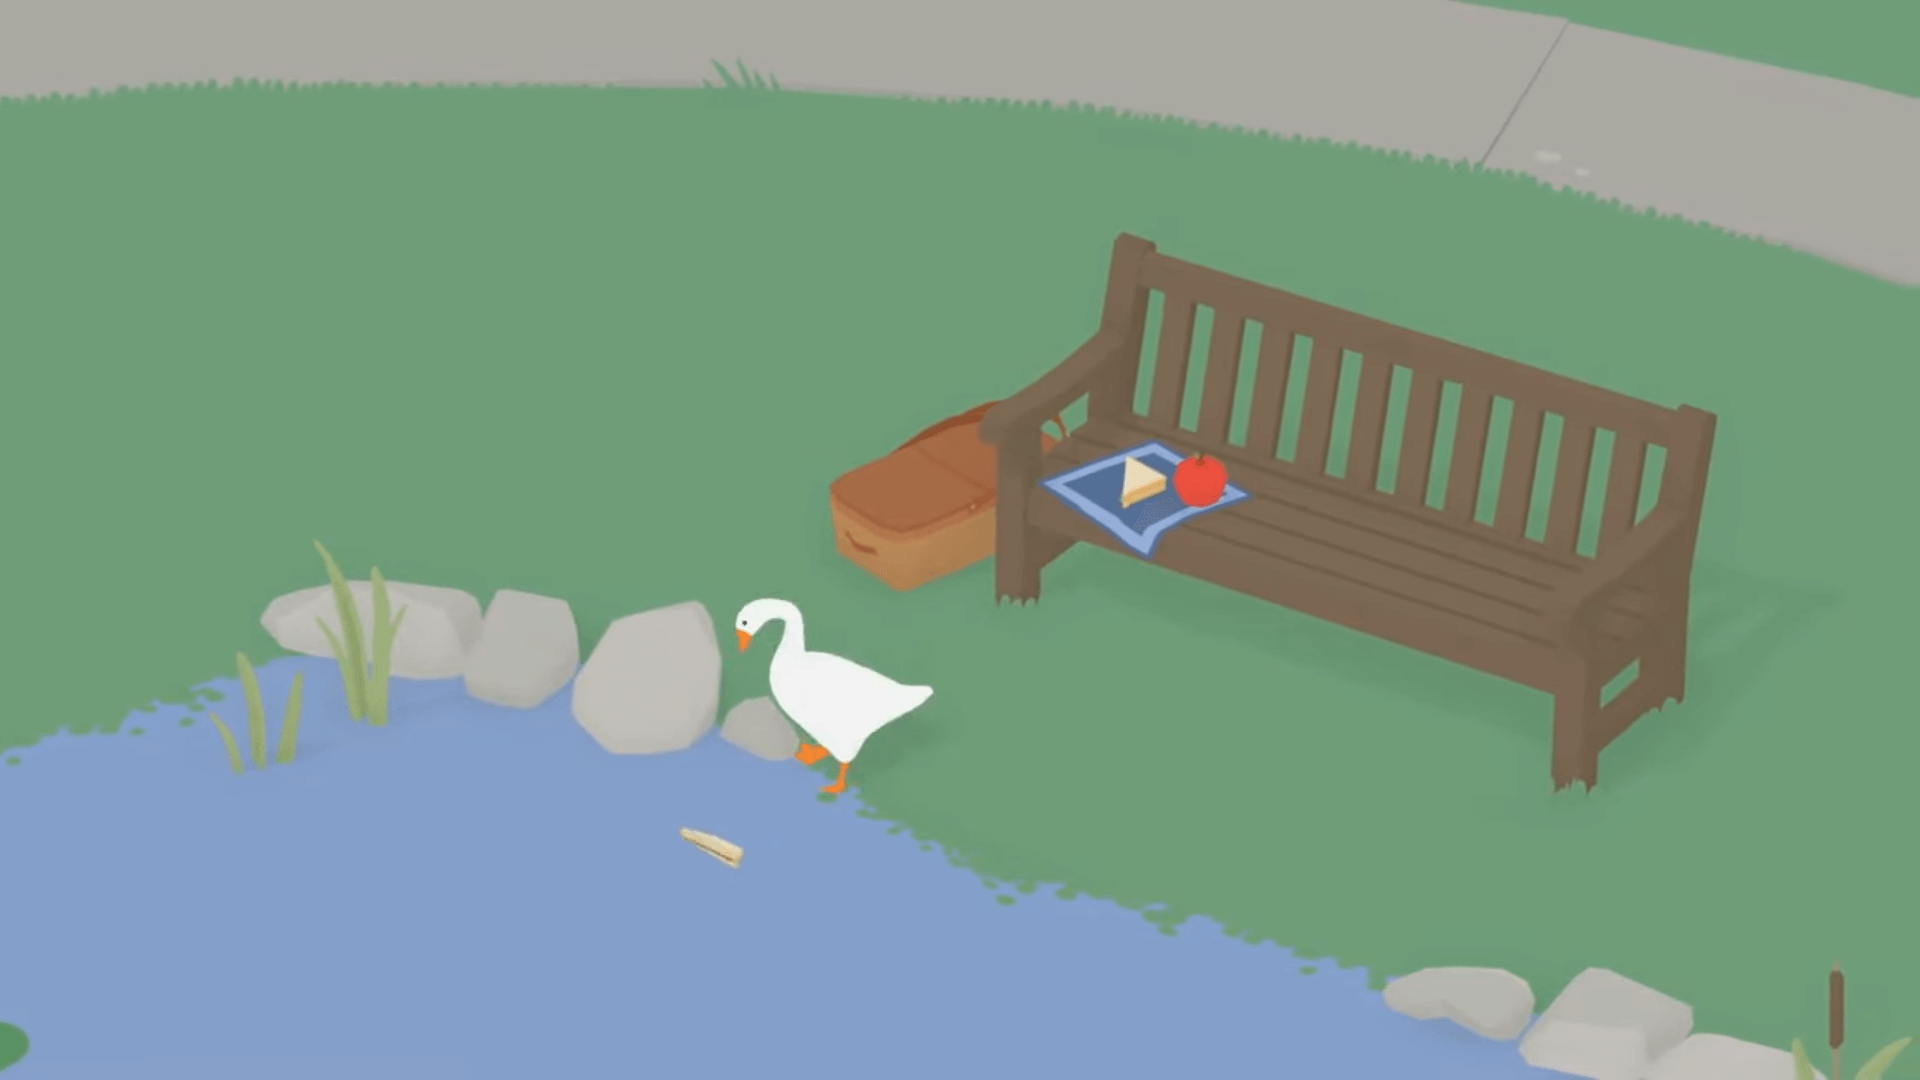 Interview: 'Untitled Goose Game' Creators